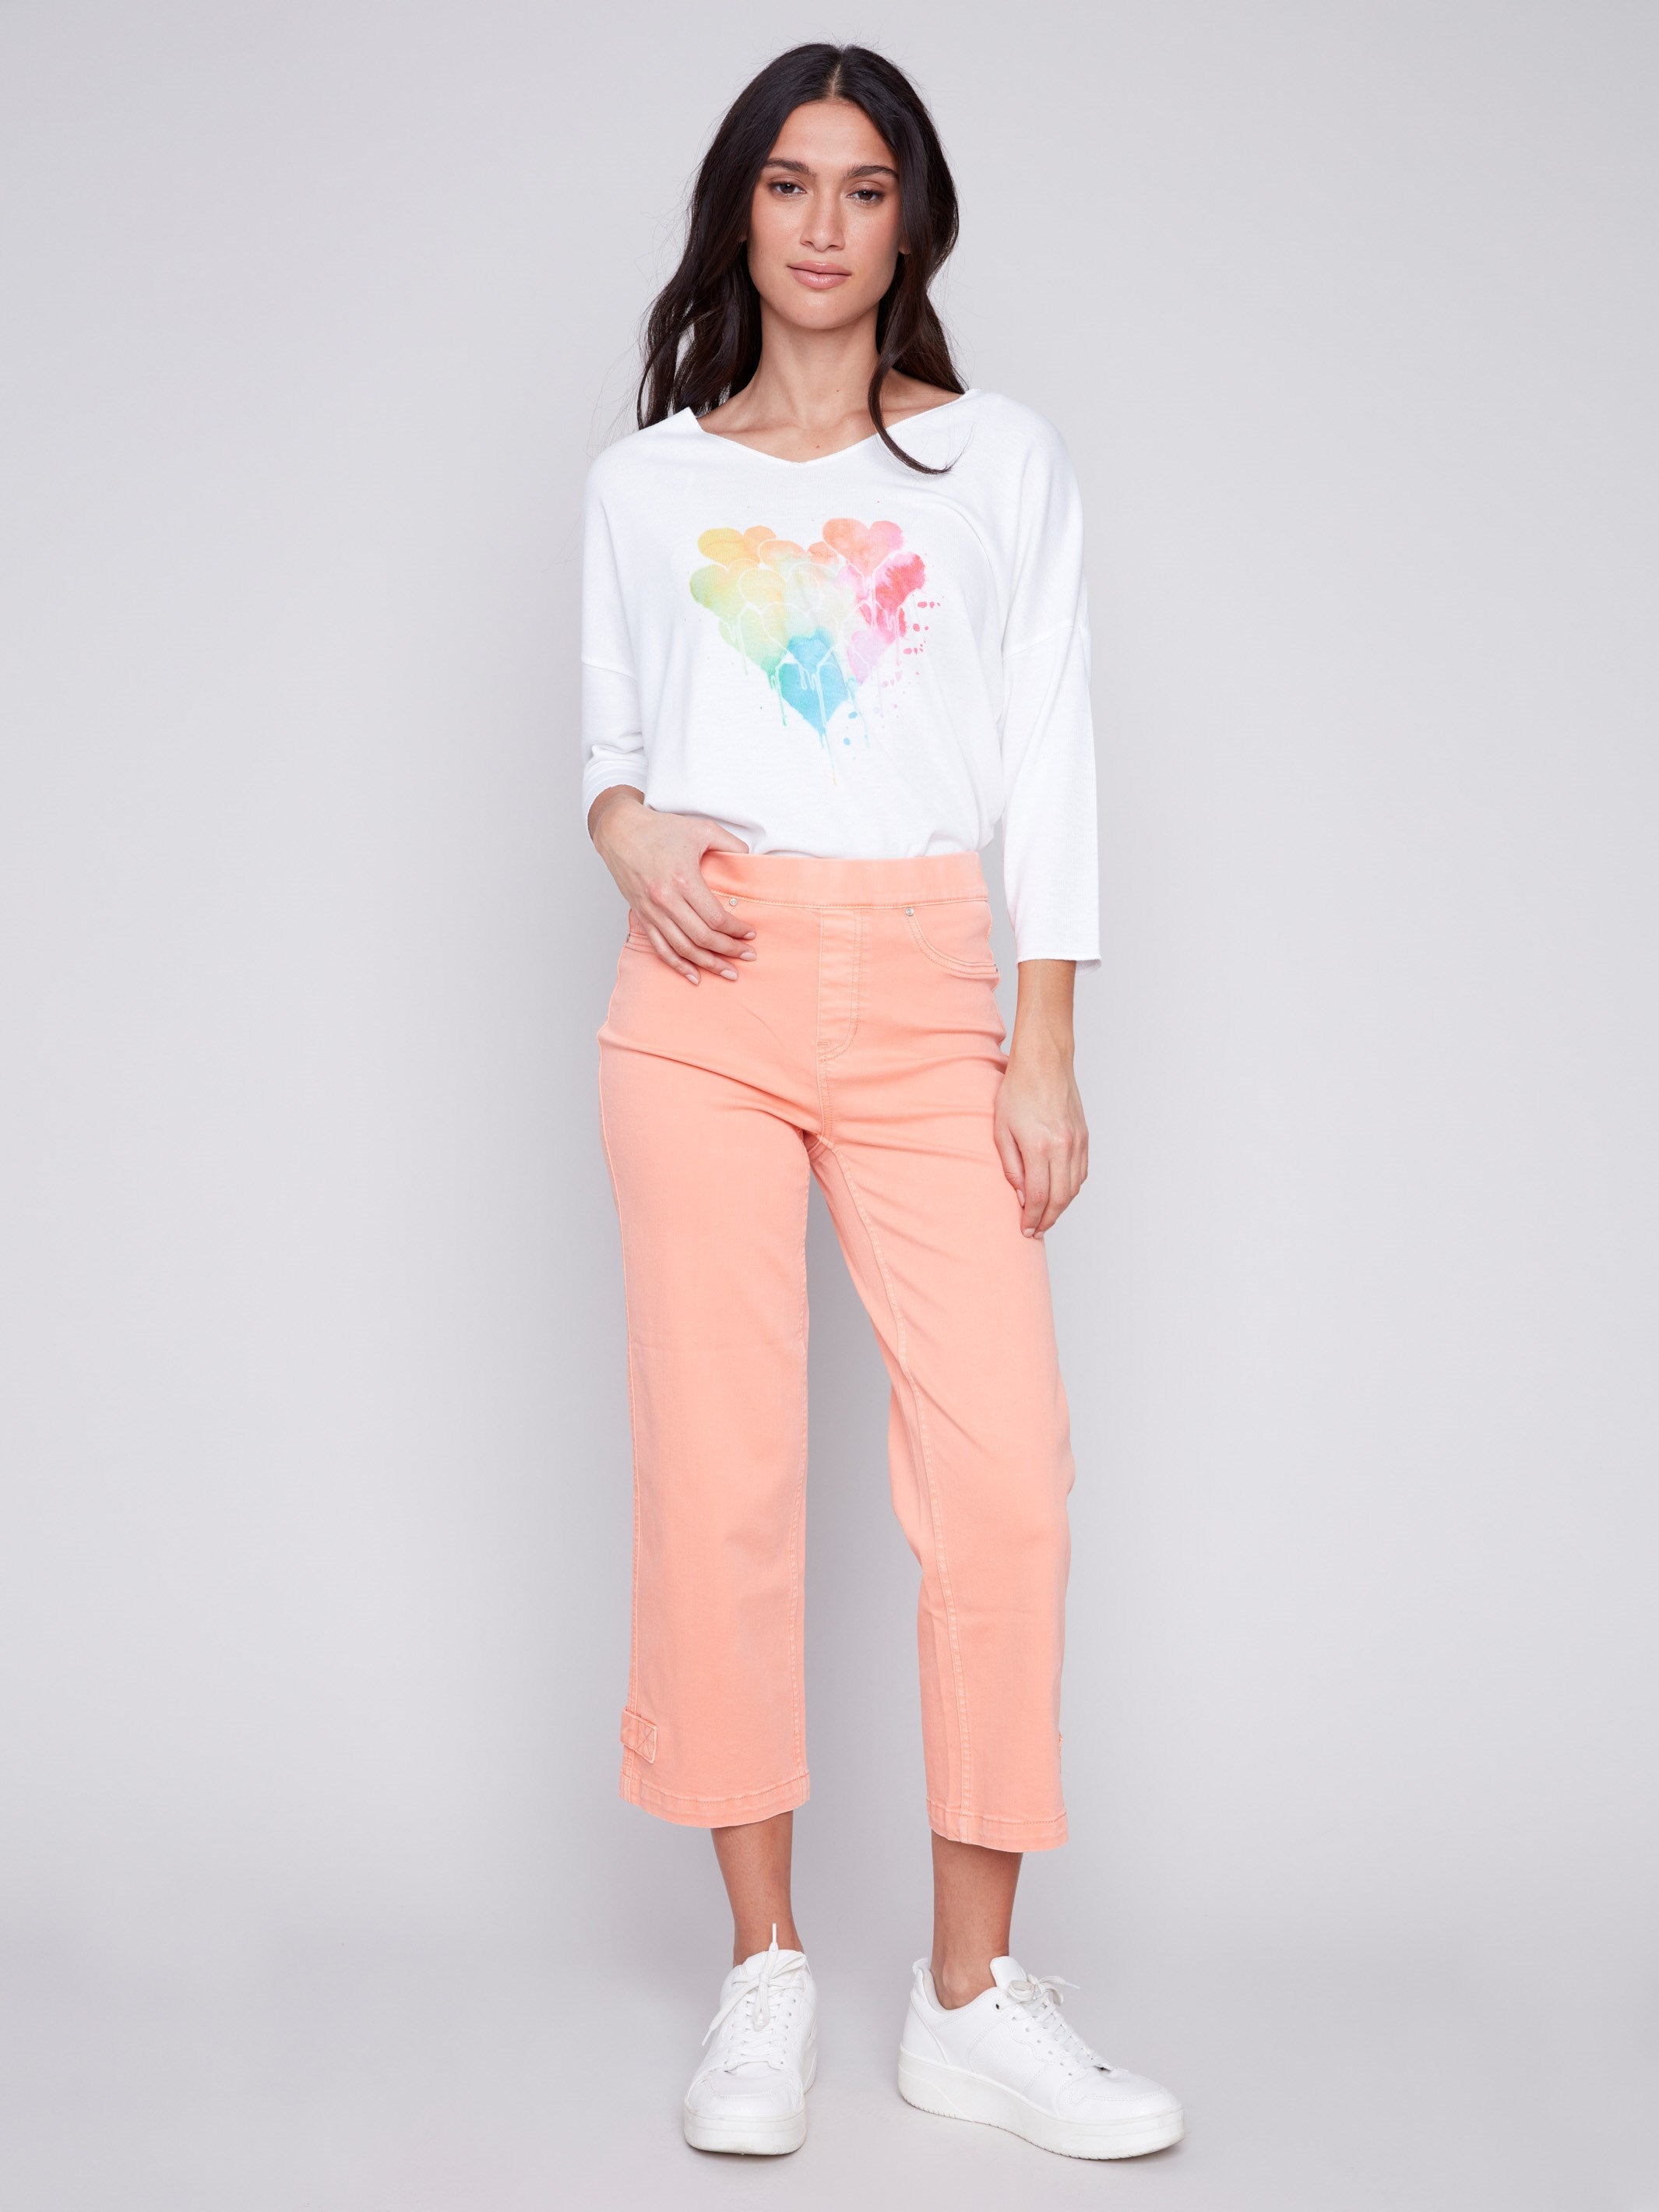 Cropped Pull-On Twill Pants with Hem Tab - Tangerine - Charlie B Collection Canada - Image 4